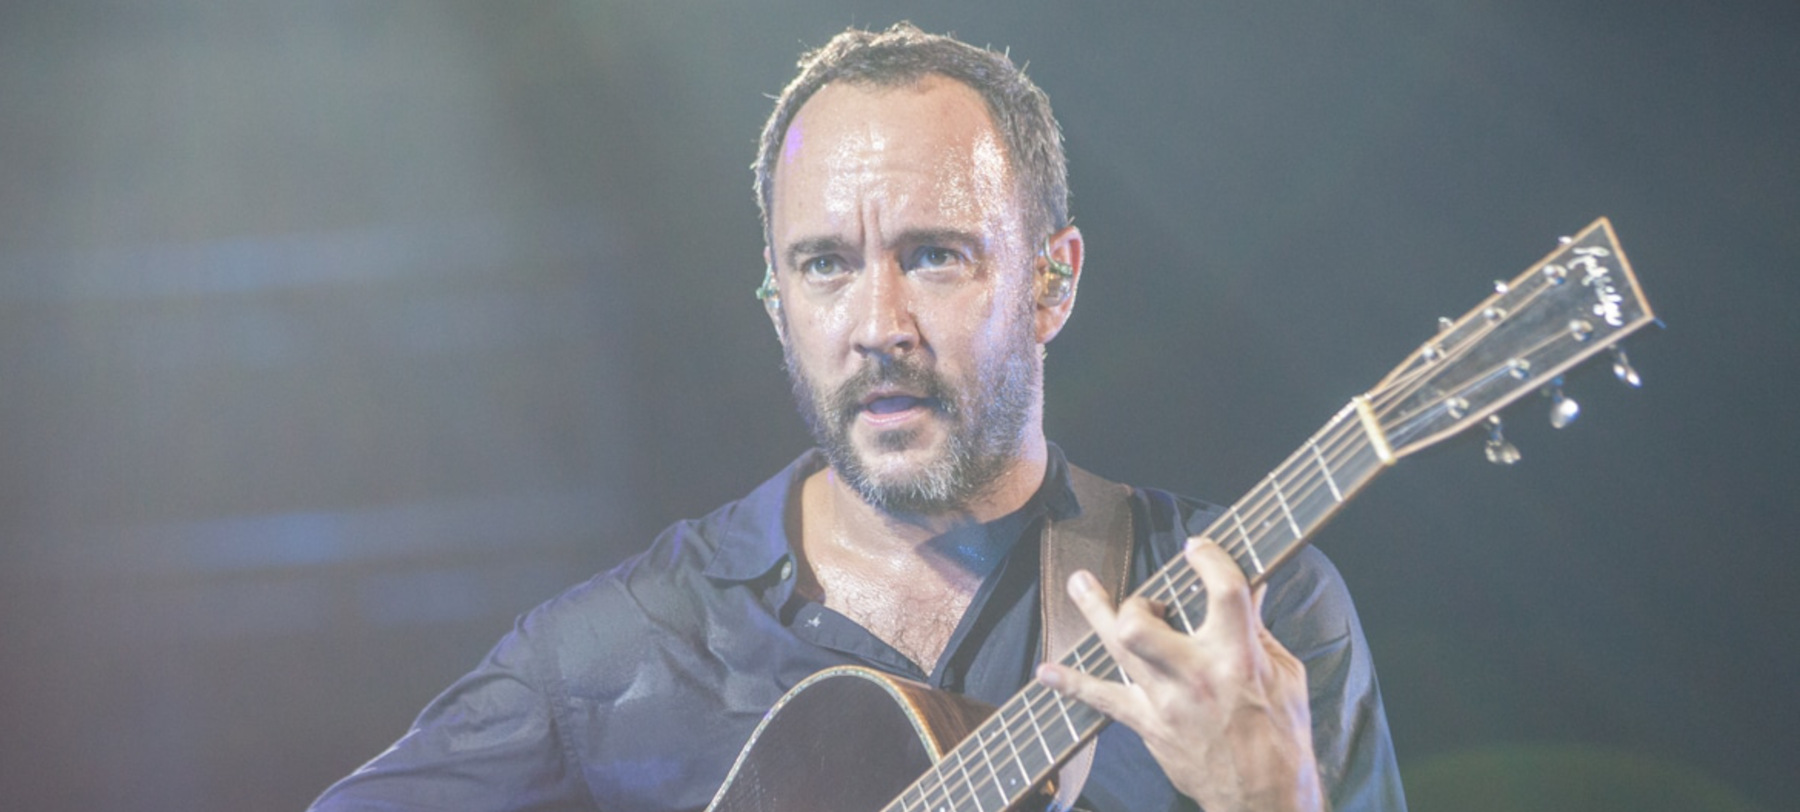 Watch: Dave Matthews and Mavis Staples Sing “(I Can’t Get No) Satisfaction”